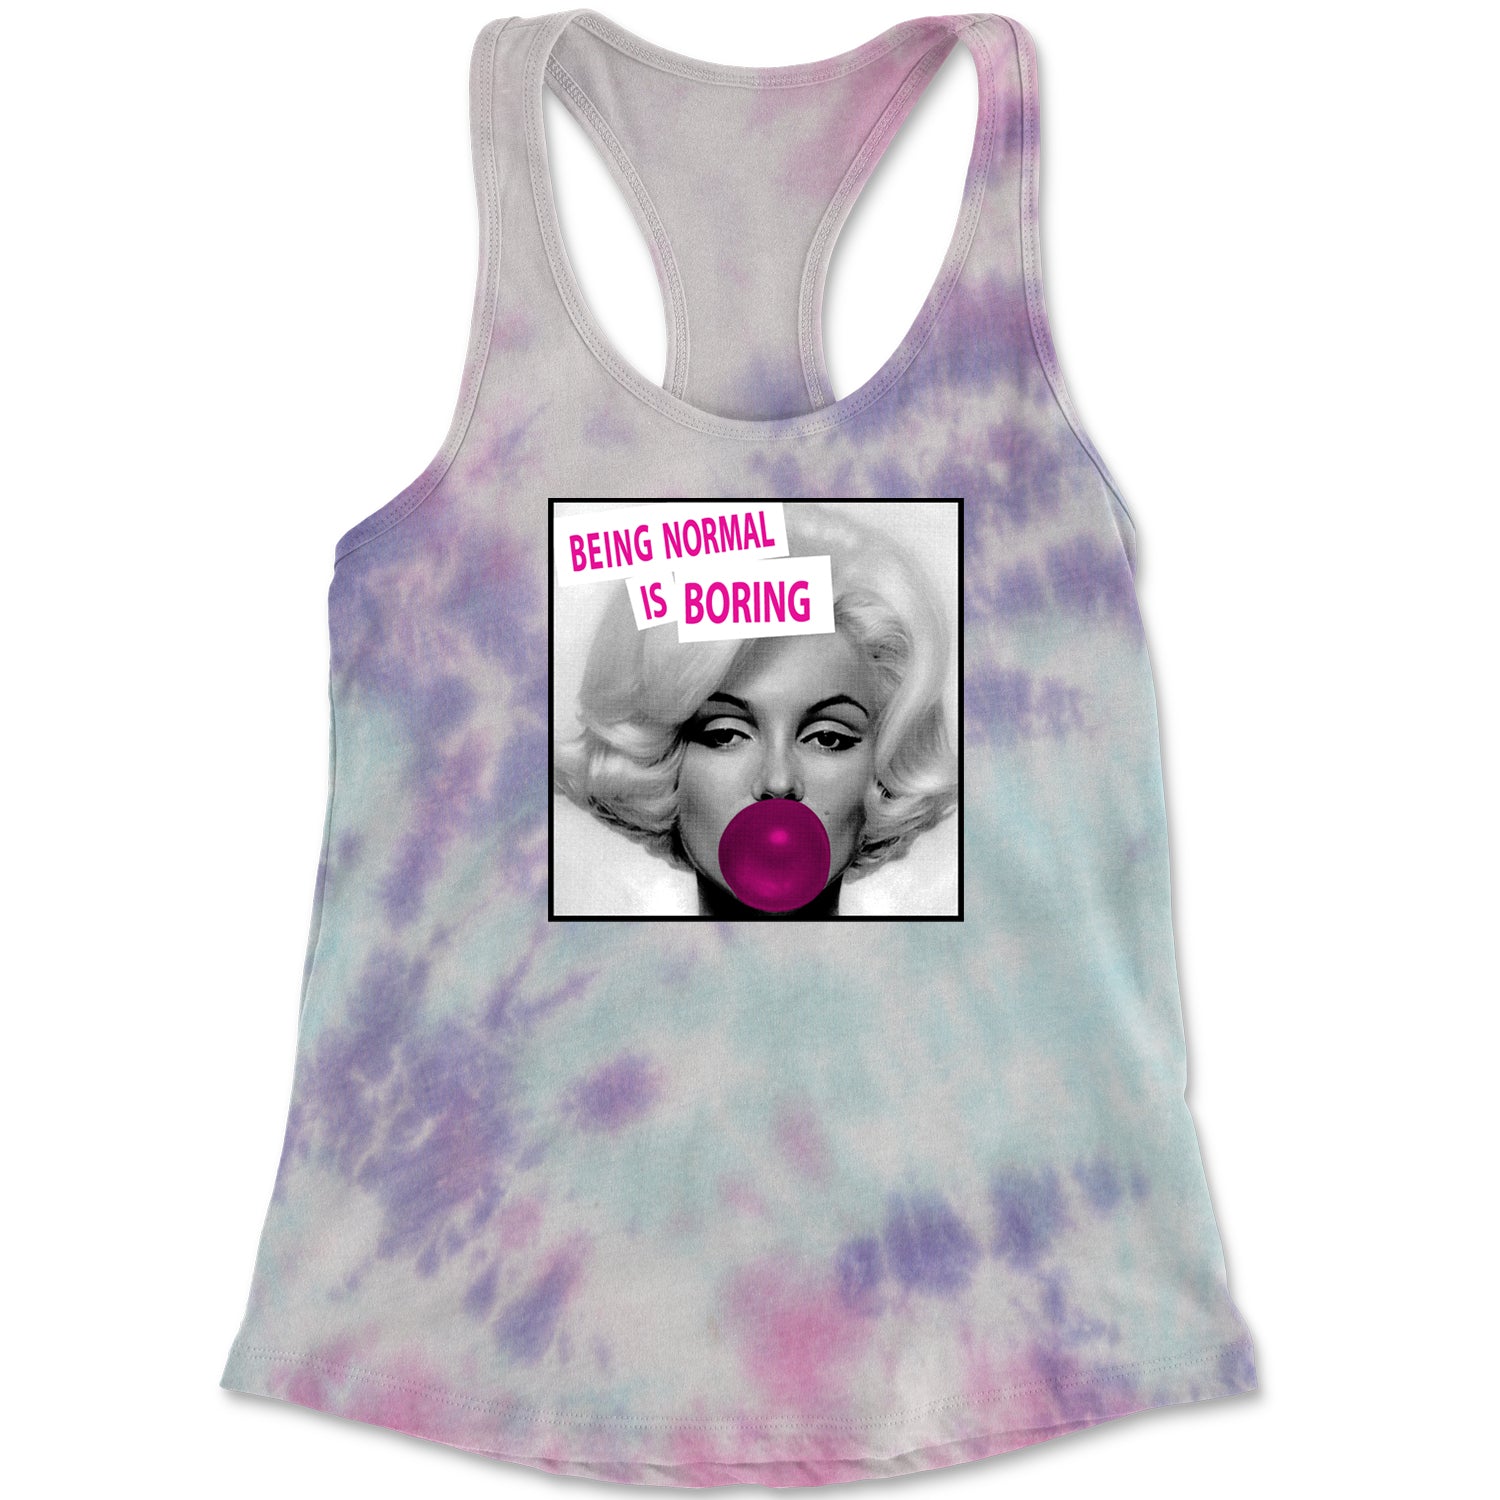 Marilyn Monroe Being Normal Is Boring Racerback Tank Top for Women art, iconic, marilyn, monroe, pop by Expression Tees